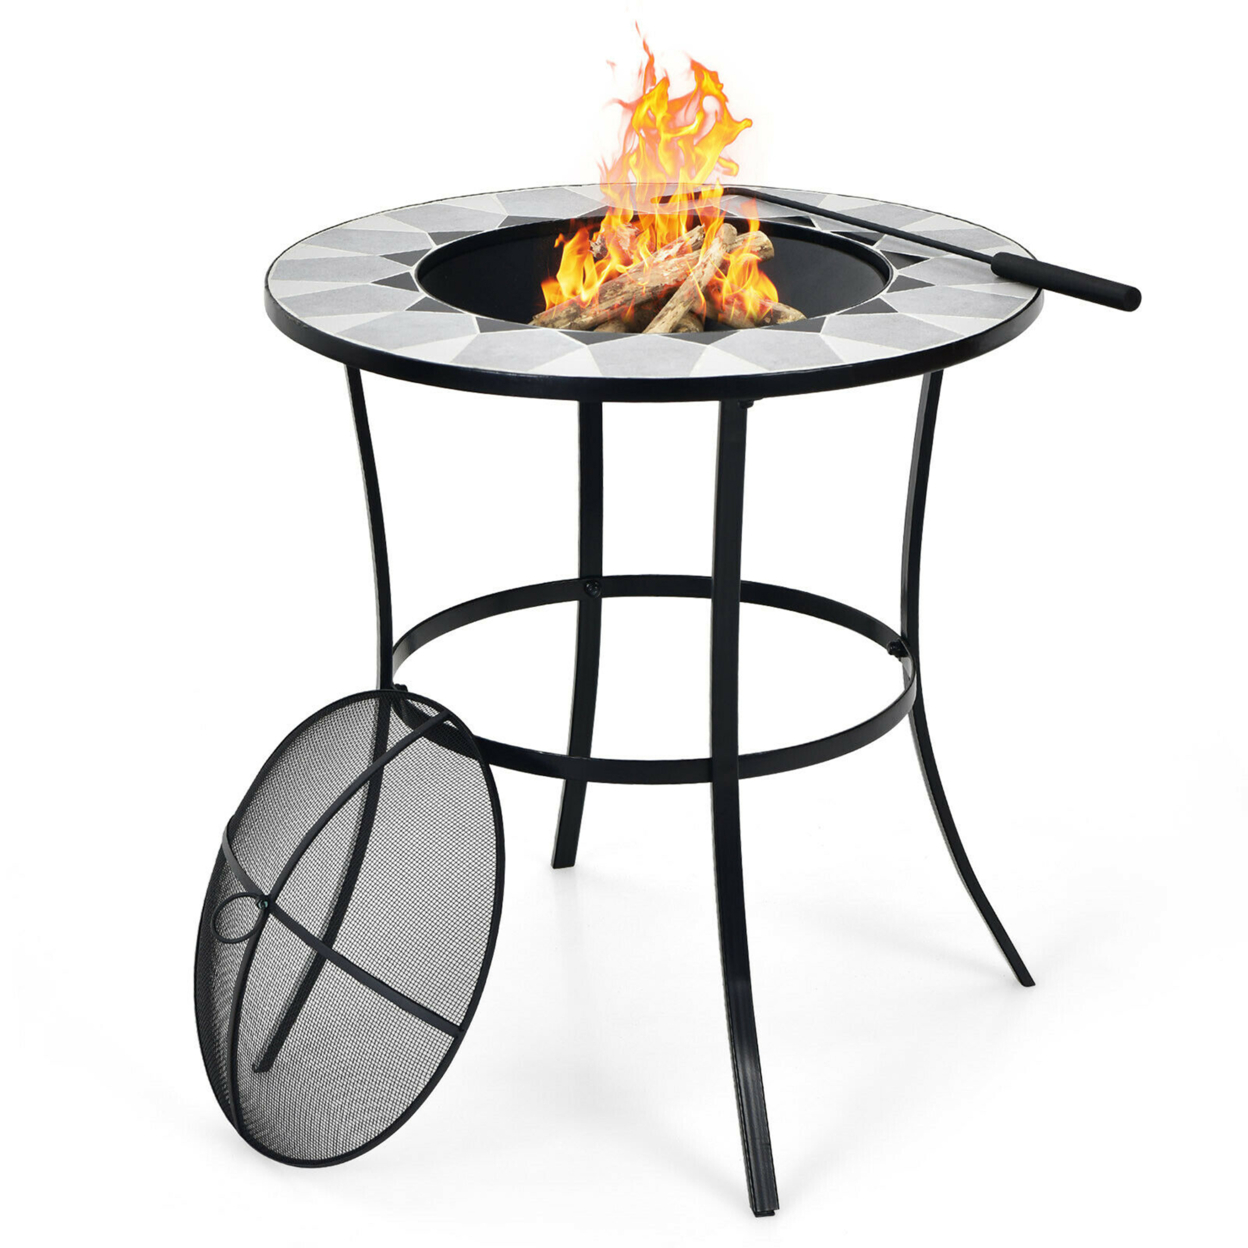 23.5'' Round Fire Pit Table Wood Burning Heater W/ Mesh Cover & Fire Poker